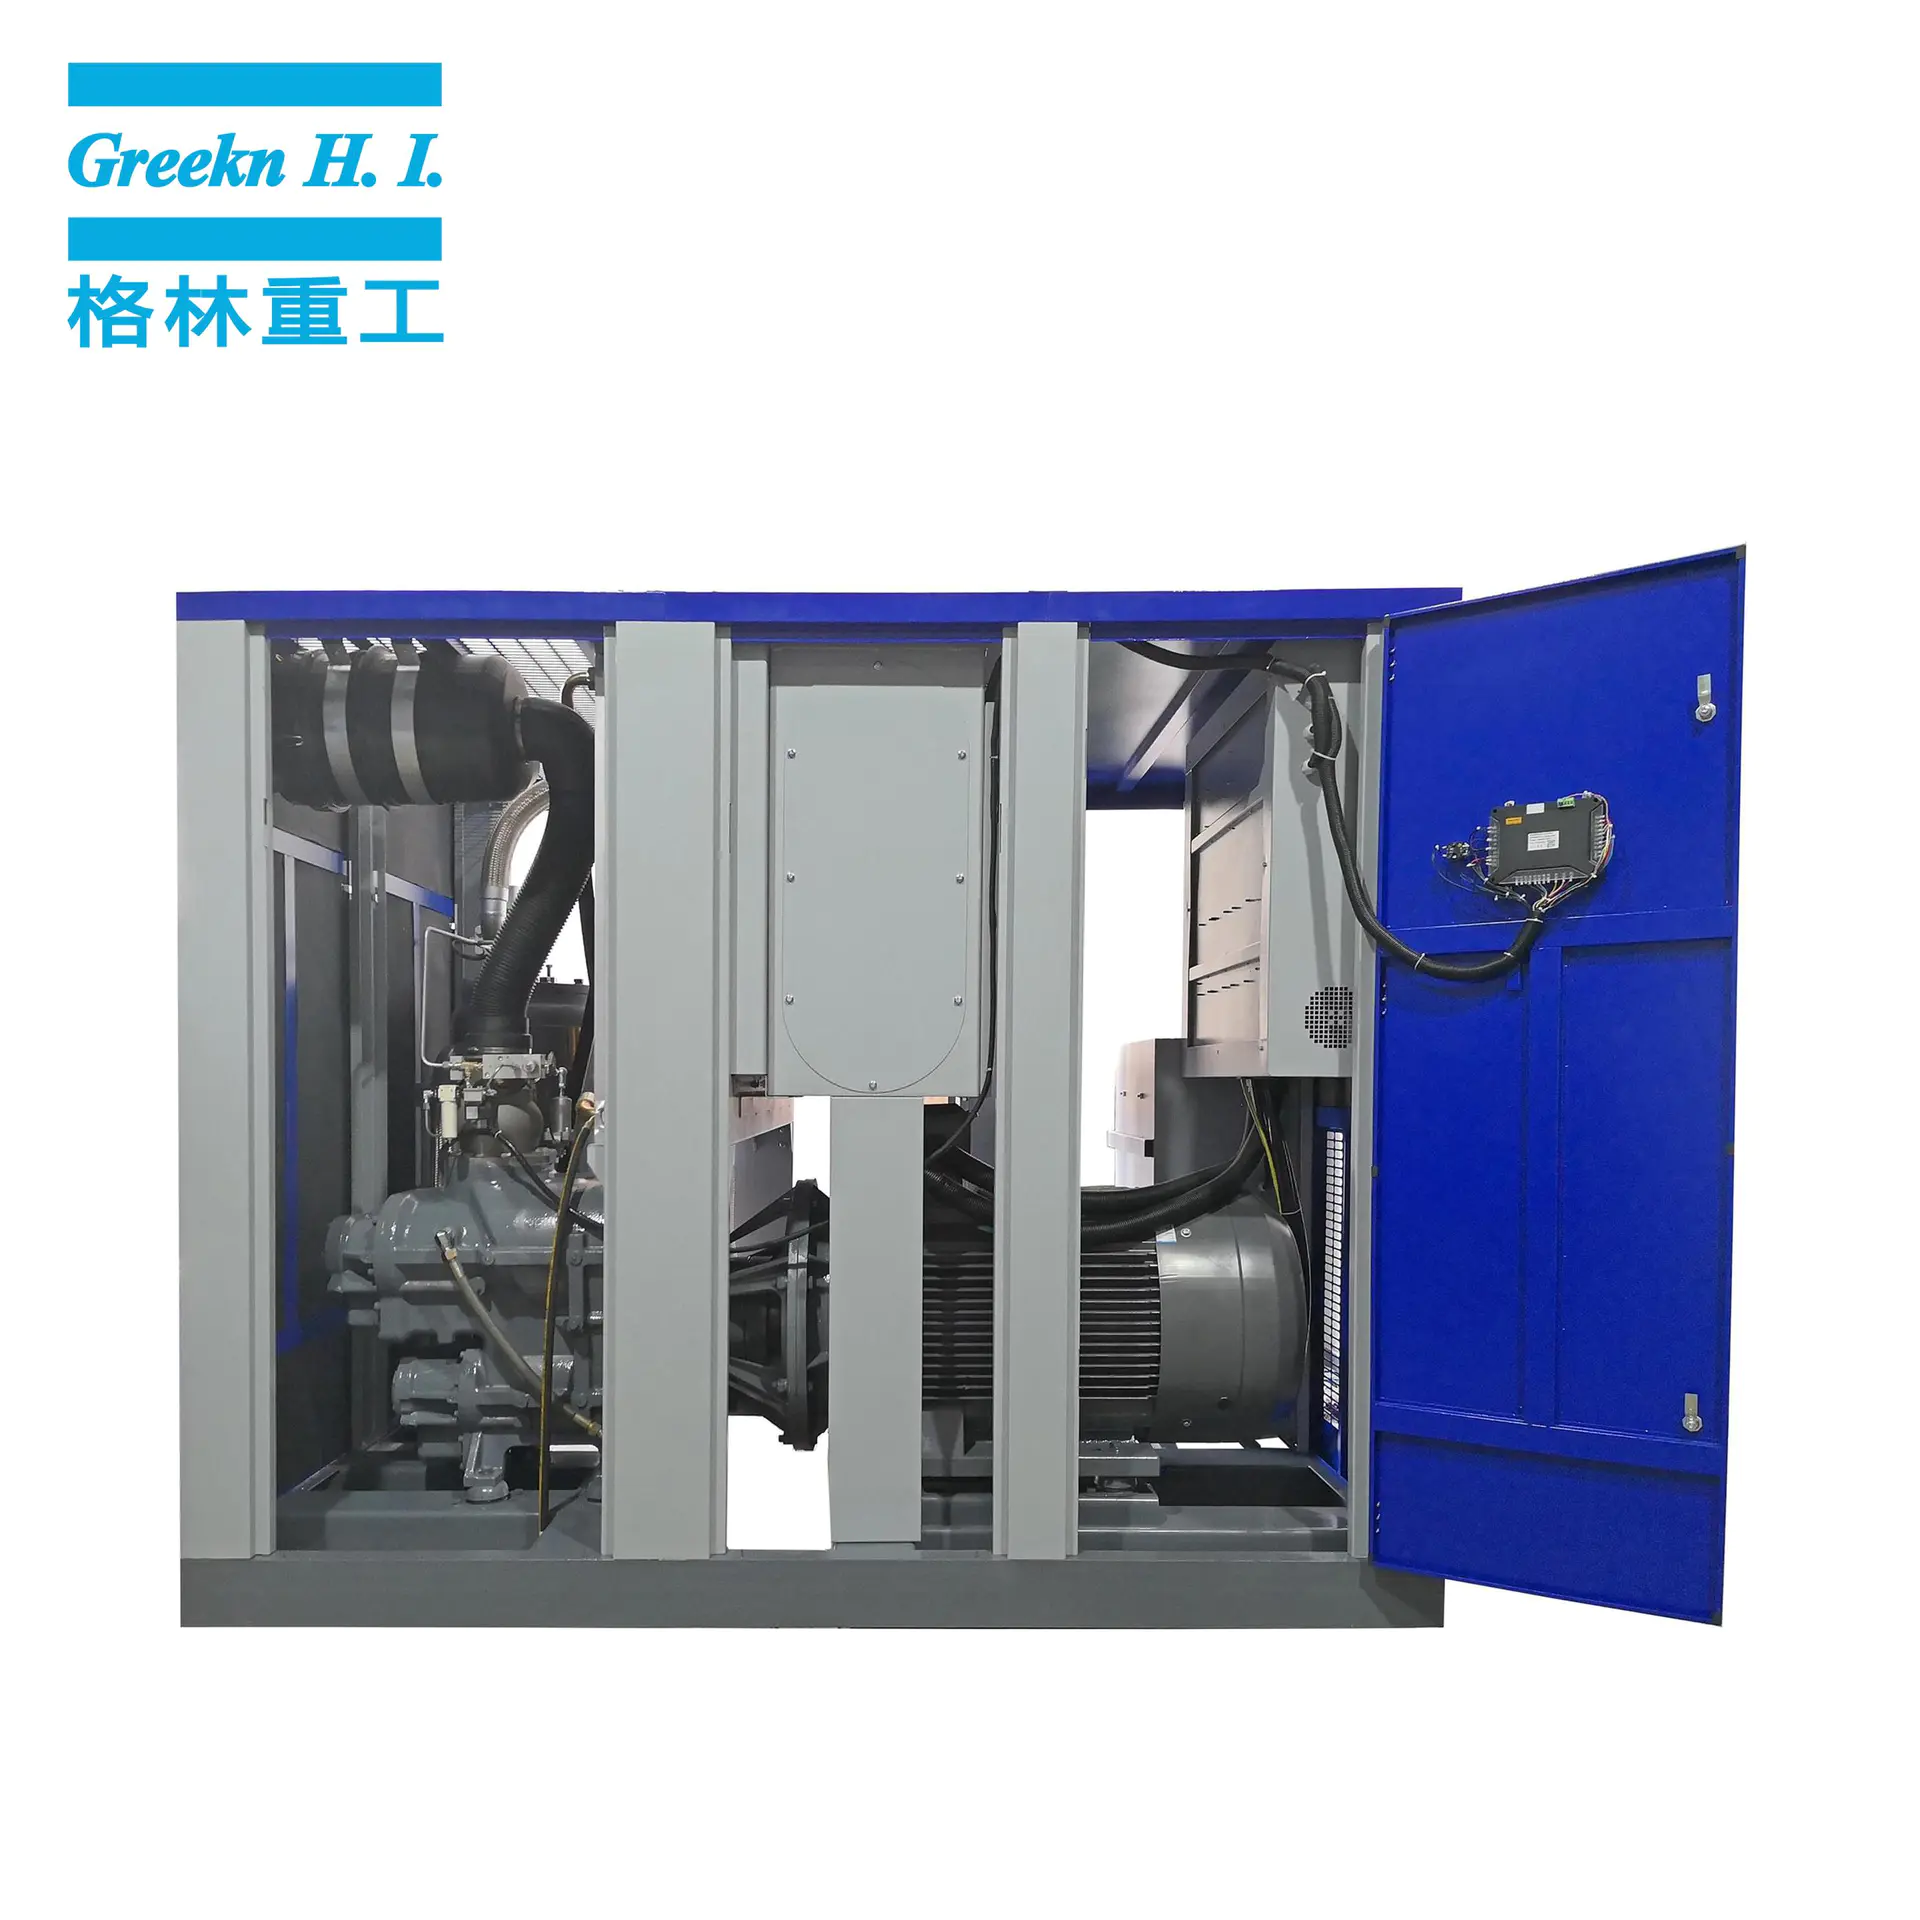 GA110+VSD Two Stage Variable Speed Rotary Screw Air Compressor